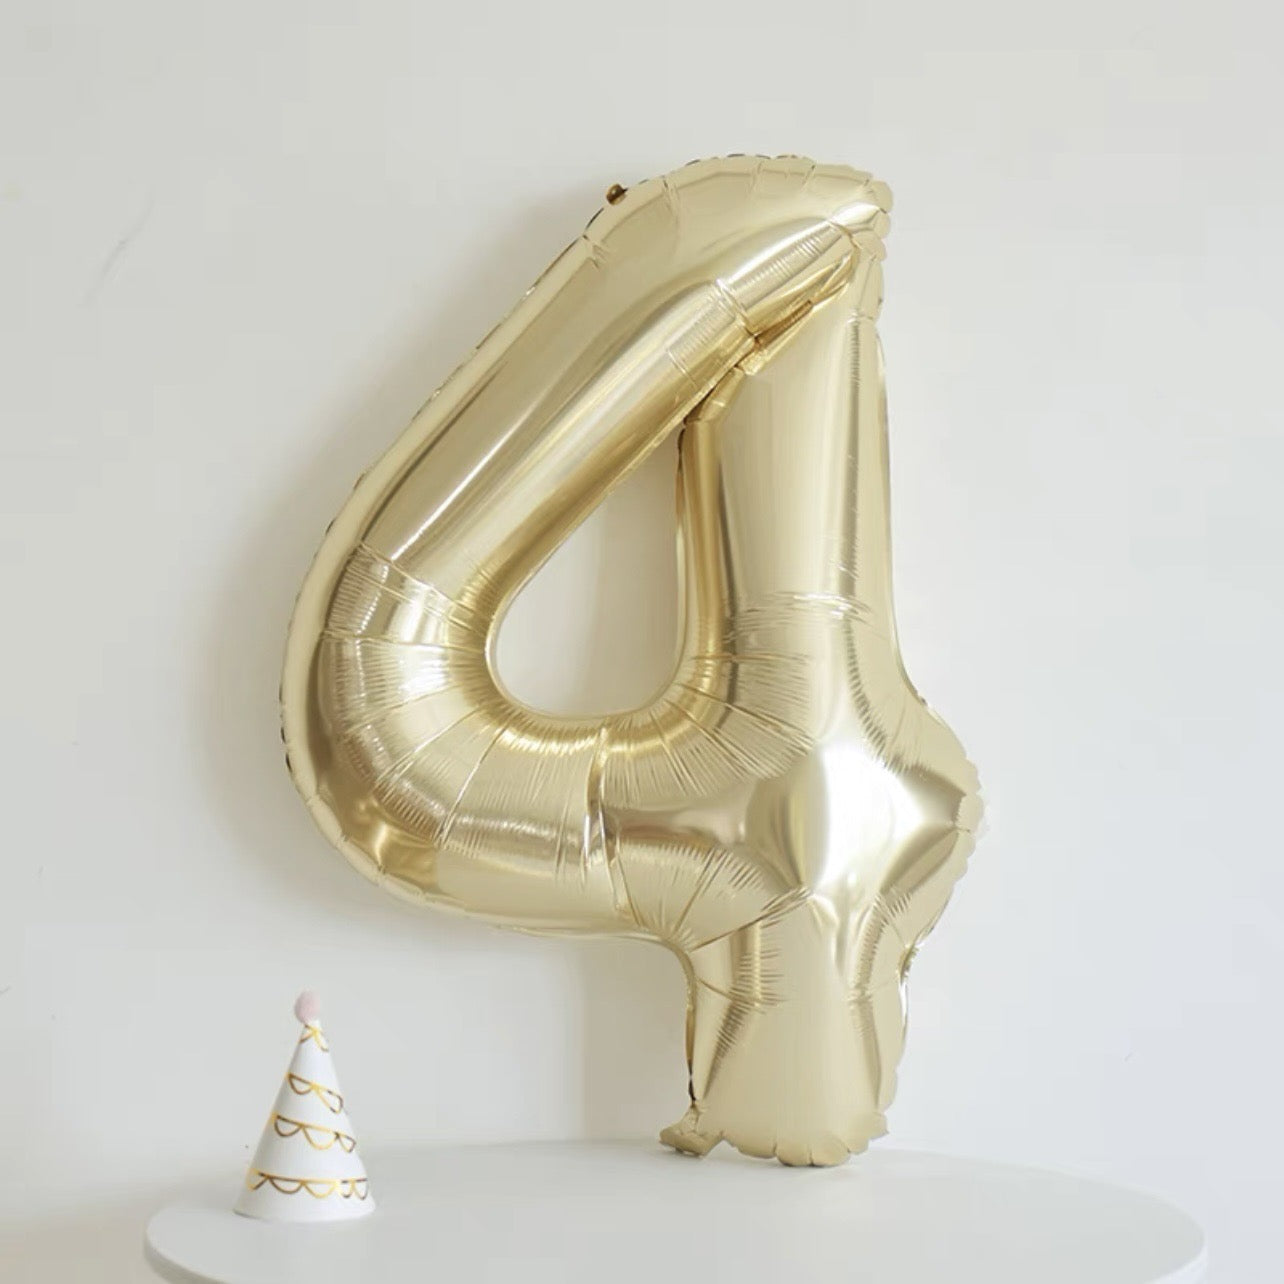 40inch number foil balloons - white gold [HELIUM] ✨👑🌟